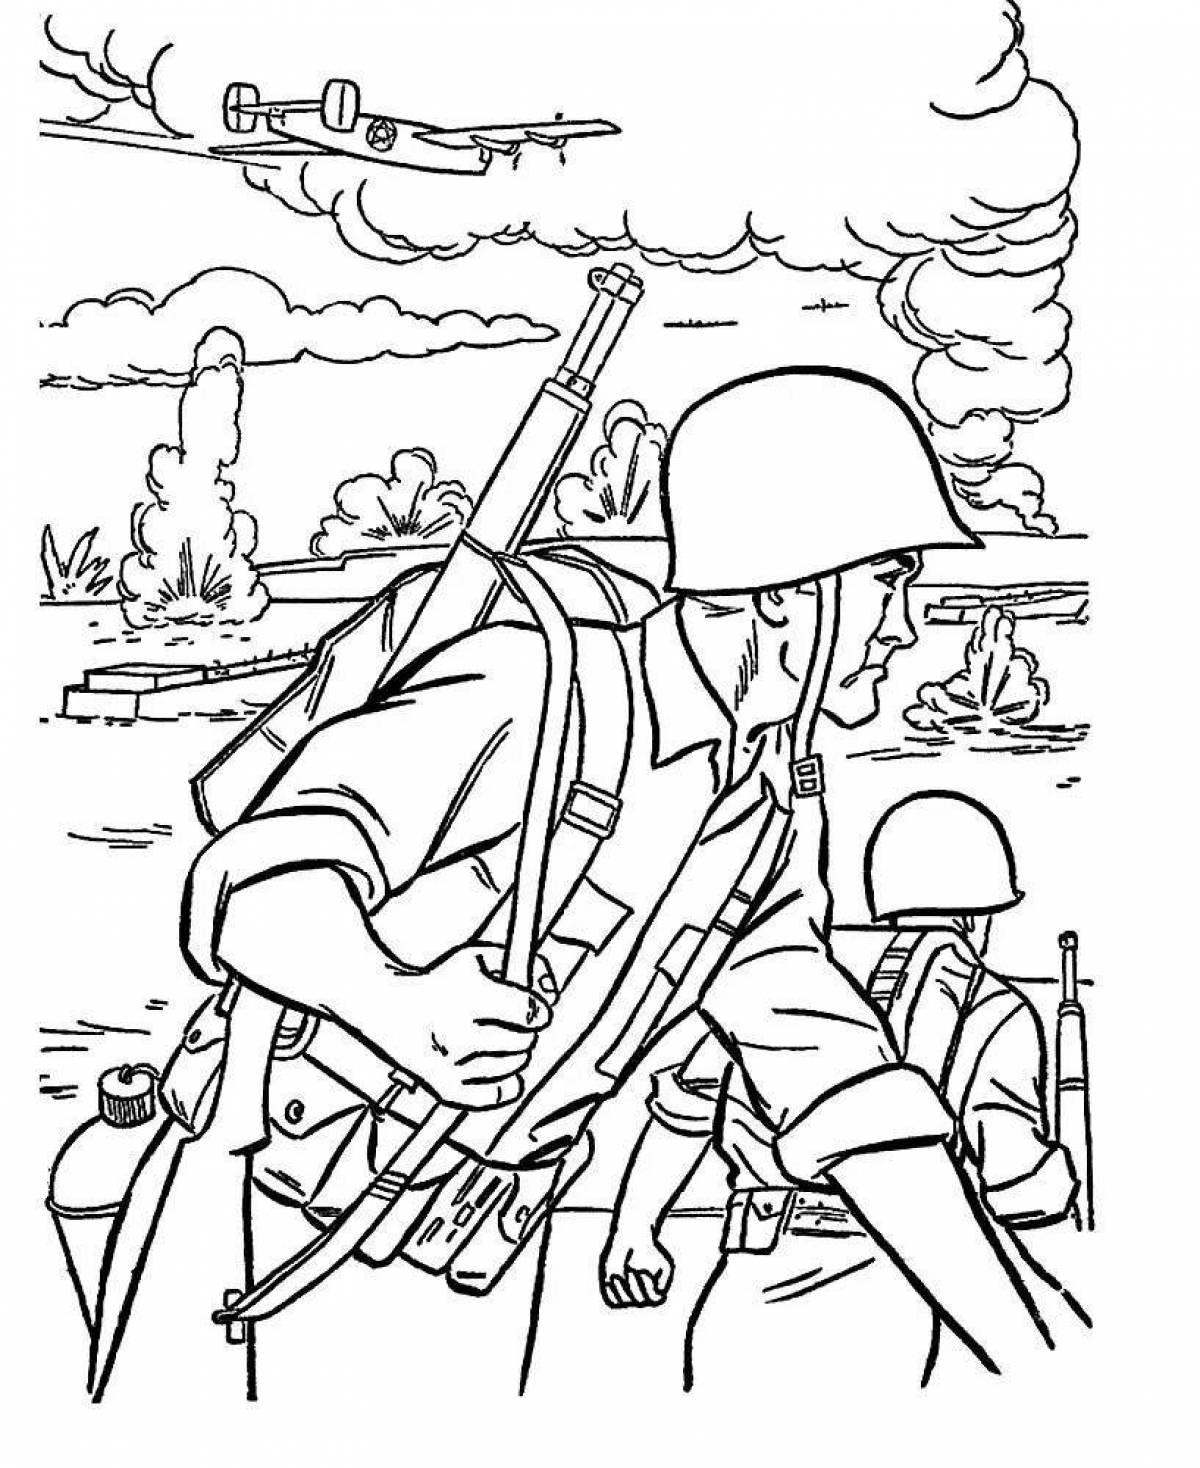 Living soldier coloring book for kids